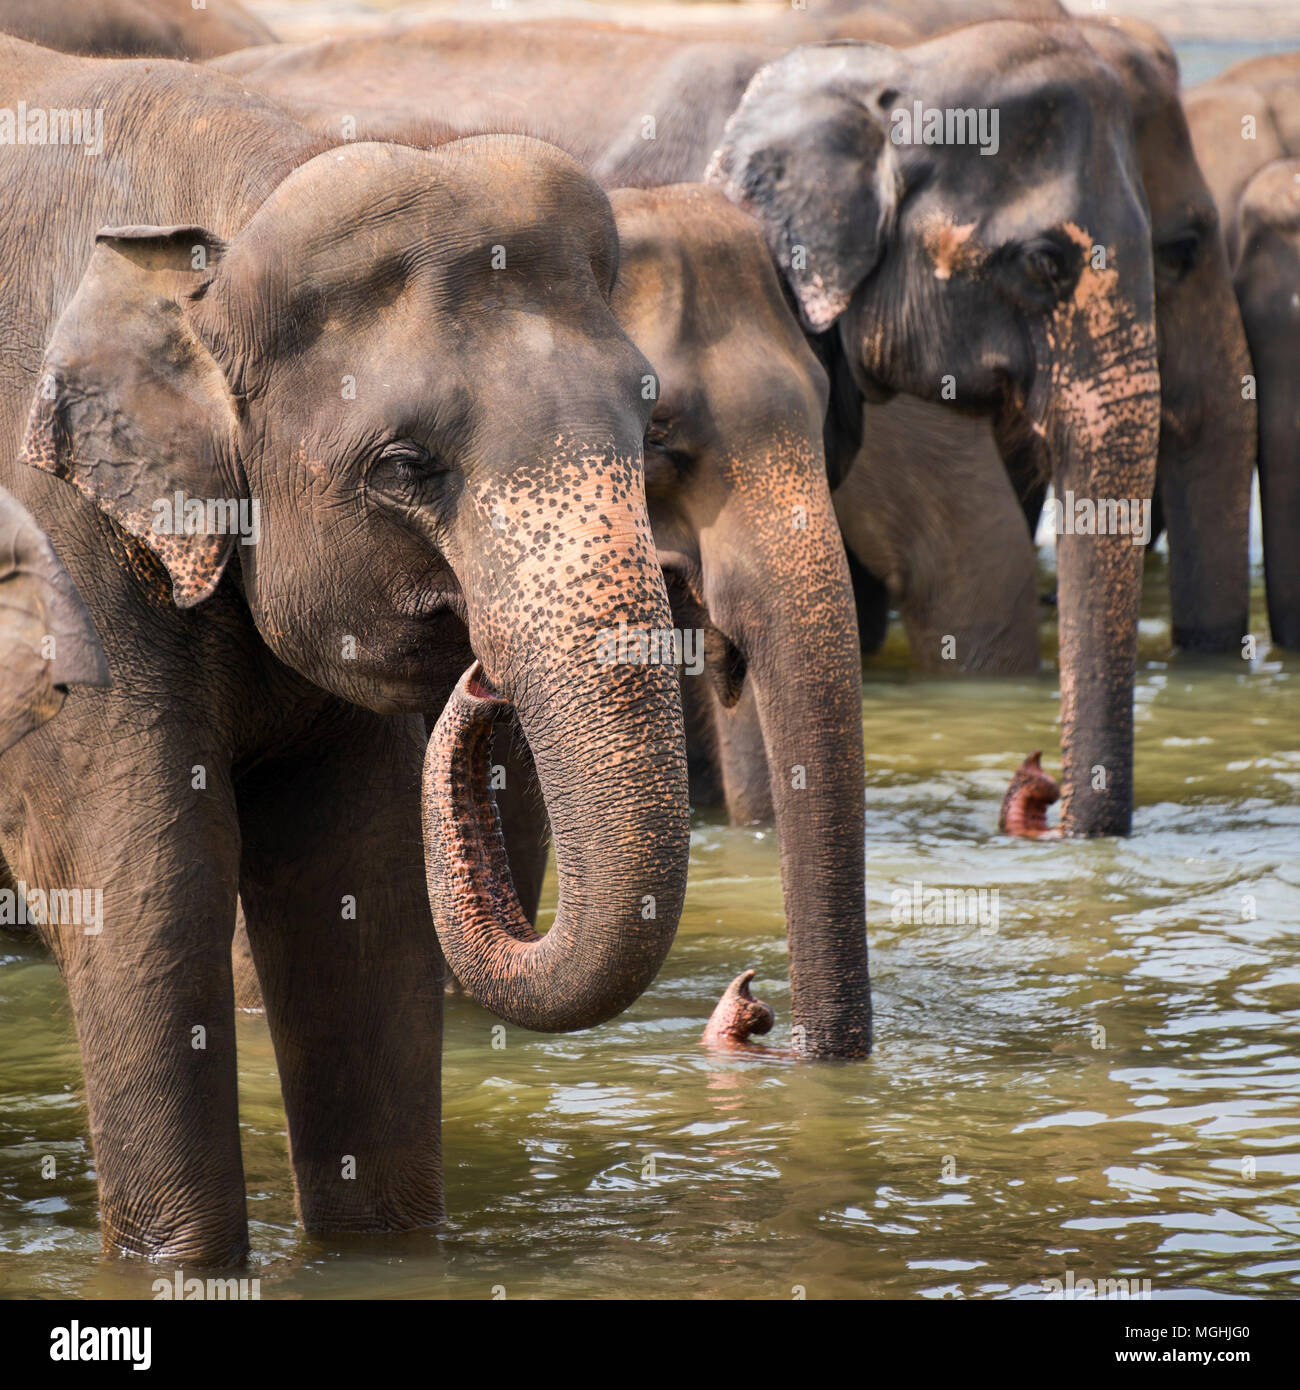 Square view of elephants having a drink in a river in Sri Lanka. Stock Photo